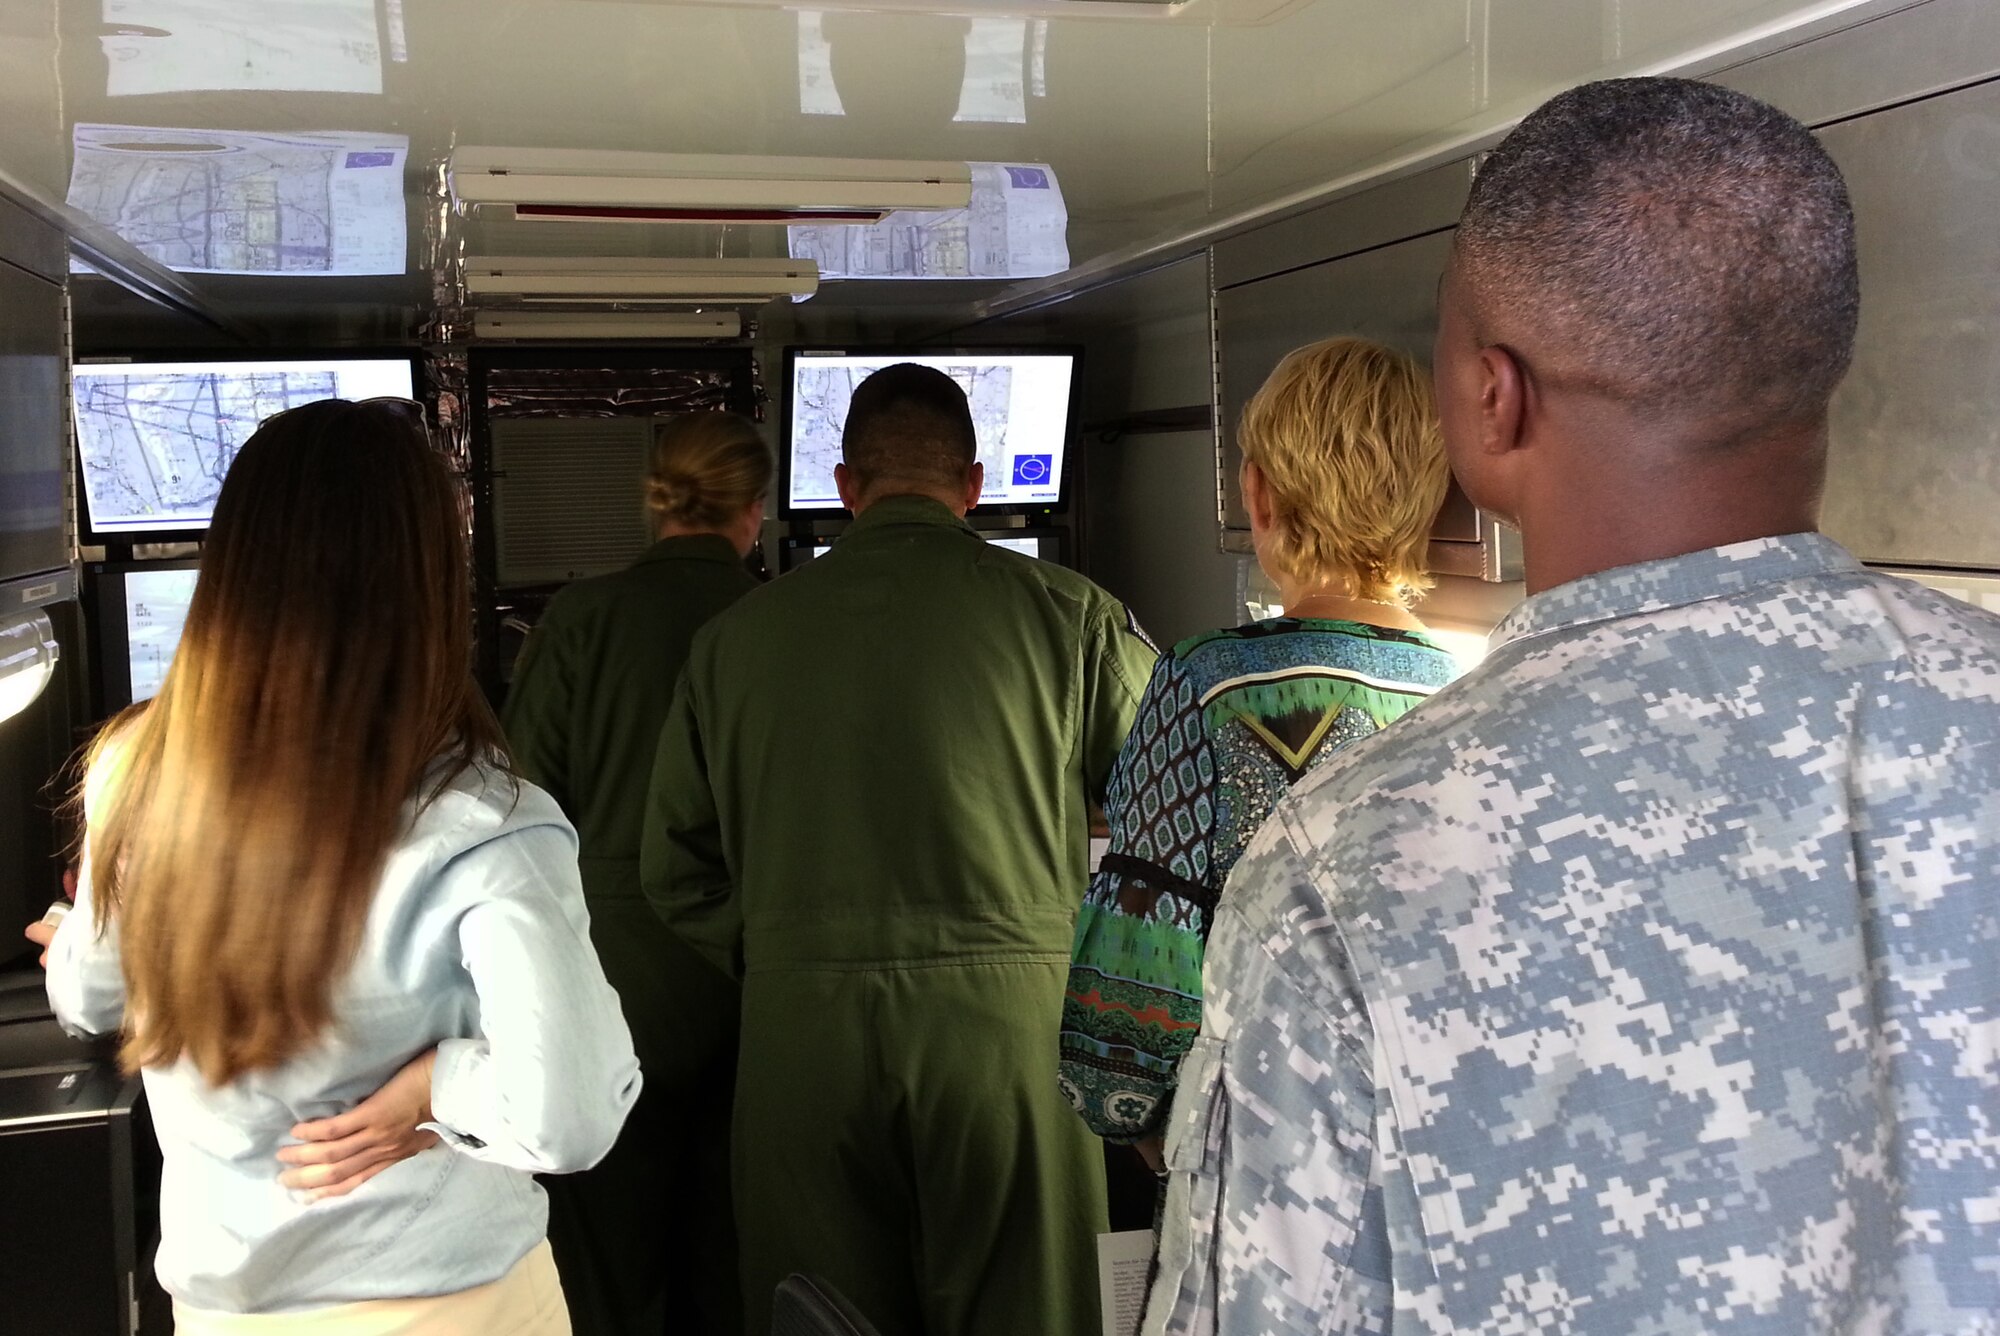 MQ-9 Reaper pilot and sensor operators with the 184th Attack Squadron showcase the Predator Reaper Integrated Mission Environment simulator to members of U.S. Rep. Steve Womack’s (R-Rogers) staff Aug. 14, 2015. Five members of Womack’s local and Washington D.C. team toured the 188th Wing. During this tour, they also received a mission briefing and tour of new 188th facilities as well as a demonstration of the RAZORBACK PAD, a 123rd Intelligence Squadron domestic operations asset. Womack’s staff also participated in an aerial tour on a UH-60 Black Hawk with the Arkansas Army National Guard’s 77th Theater Aviation Brigade. The objective of the aerial tour was to view assets at Fort Chaffee Joint Maneuver Training Center and 188th Detachment 1 Razorback Range. (U.S. Air National Guard photo by Maj. Heath Allen/Released)